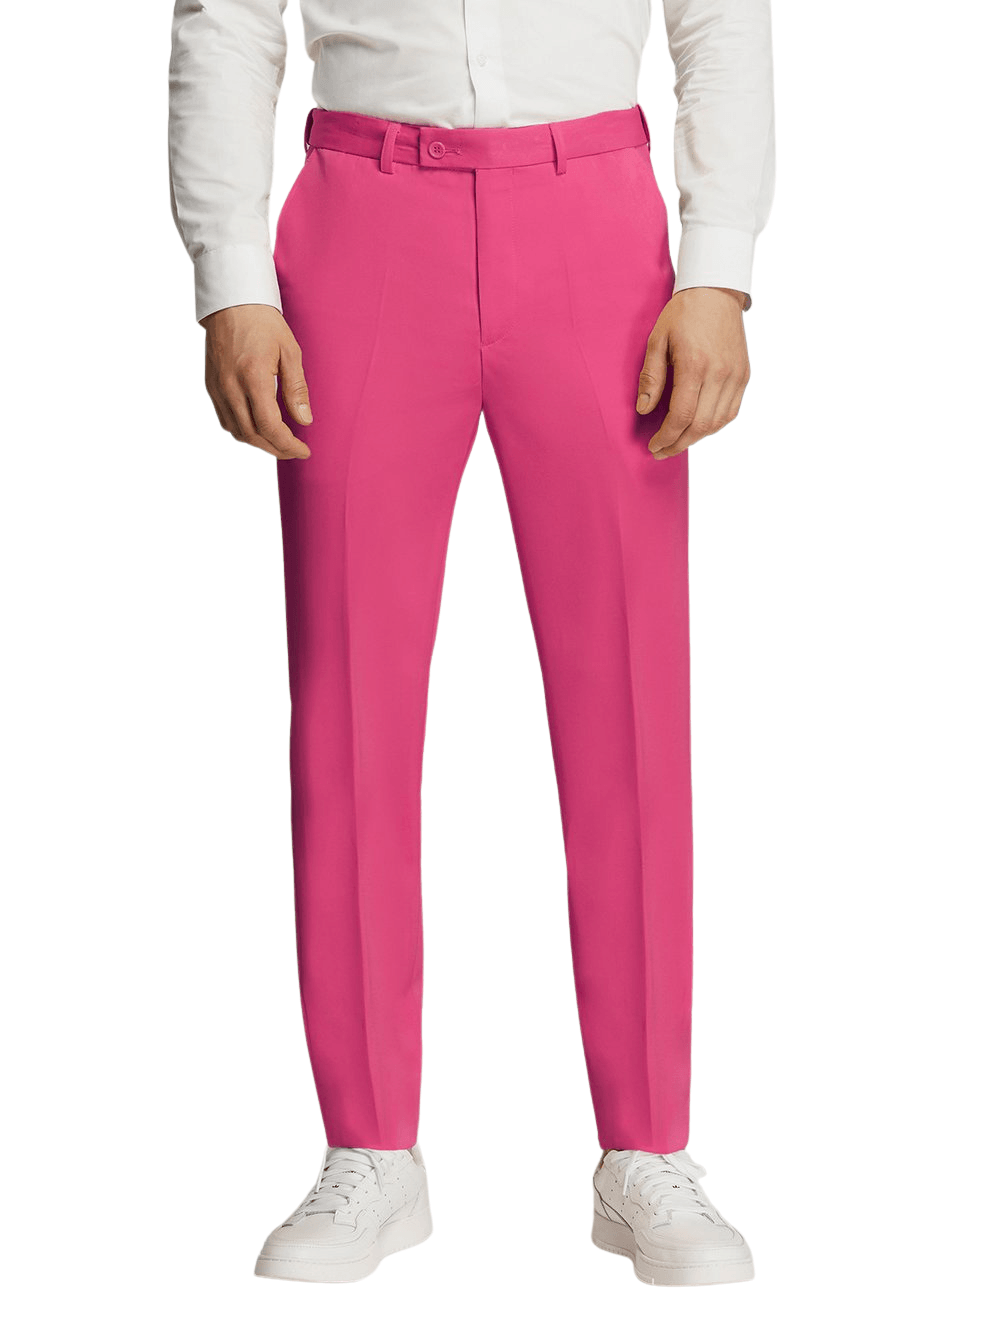 Men's Formal Hot Pink Microfibre Coloured Trousers